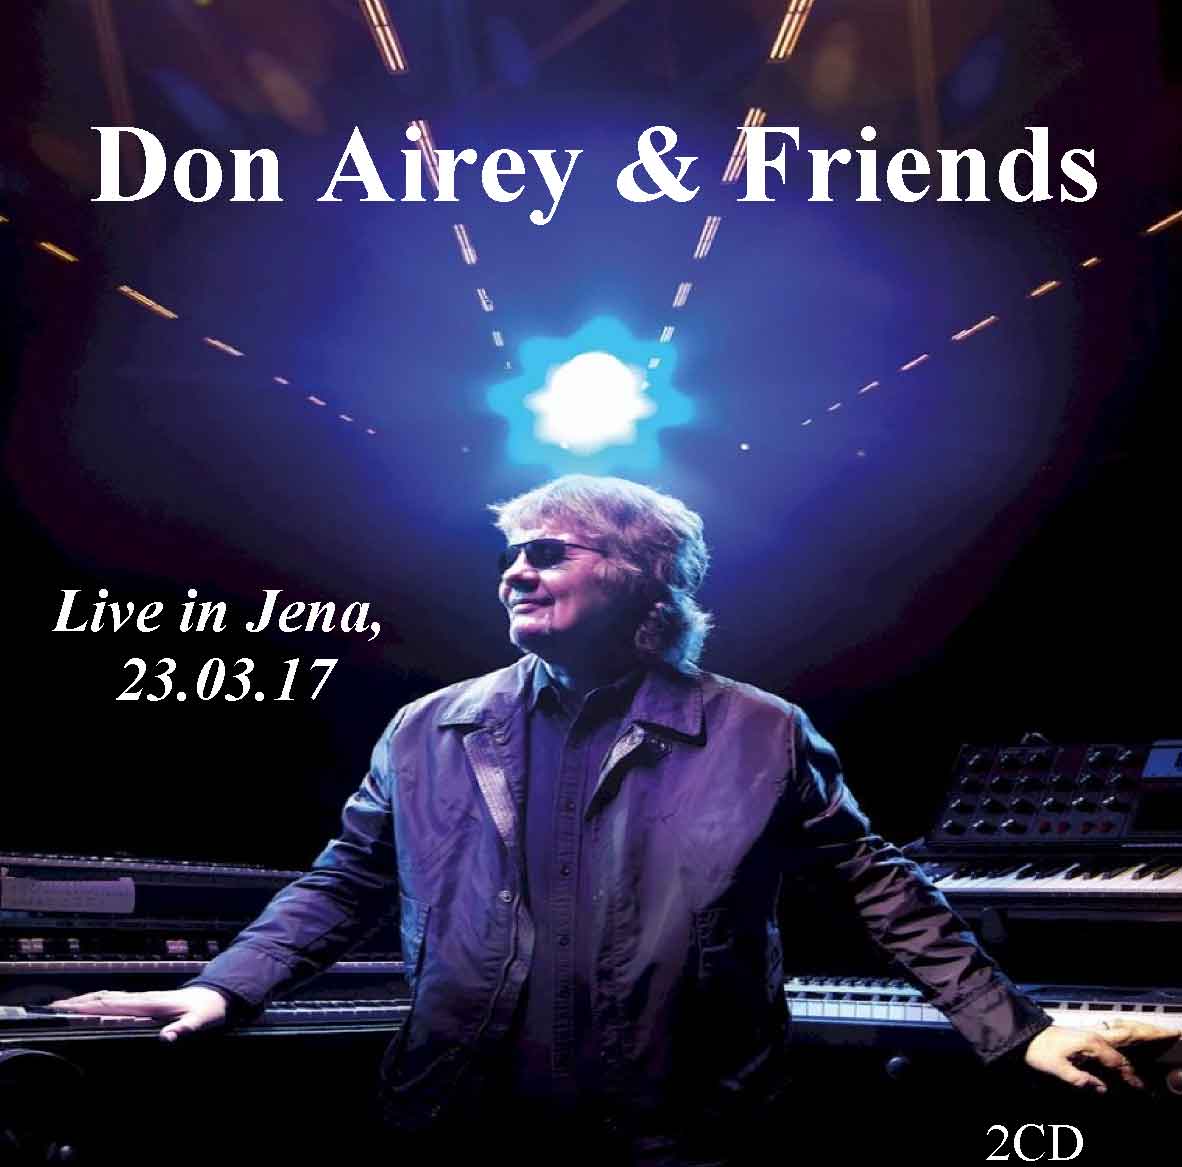 Don Airey & Friends - Live in Jena, 23.03.17